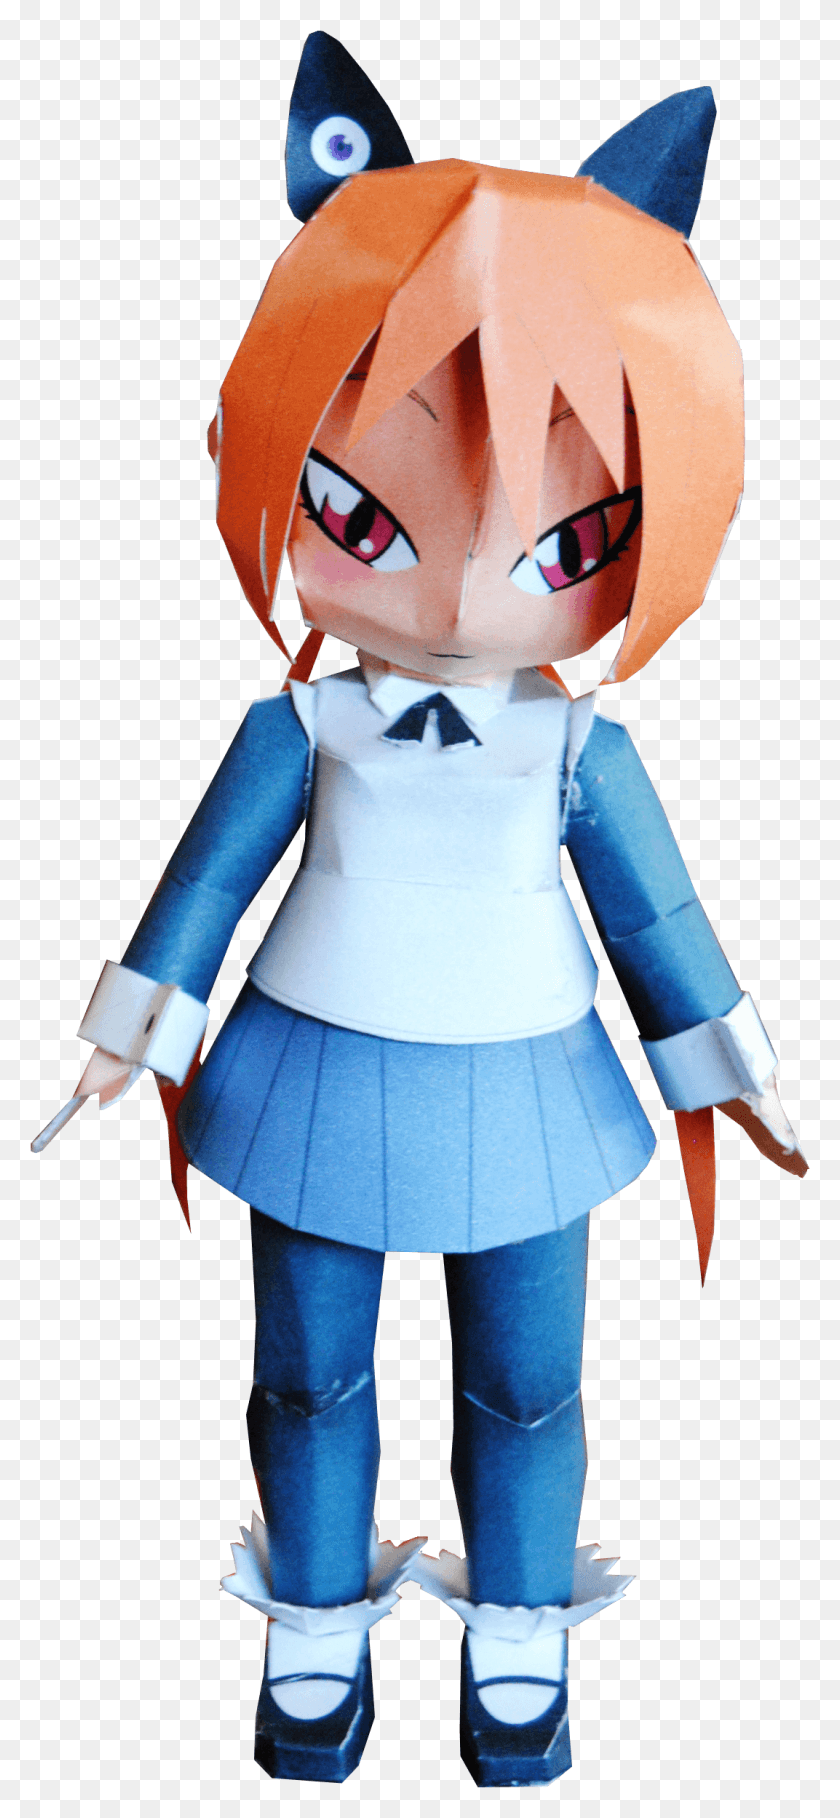 1072x2417 Alisa Southerncross From Sgt Frog Chibi Doll Figurine, Toy, Persona, Humano Hd Png